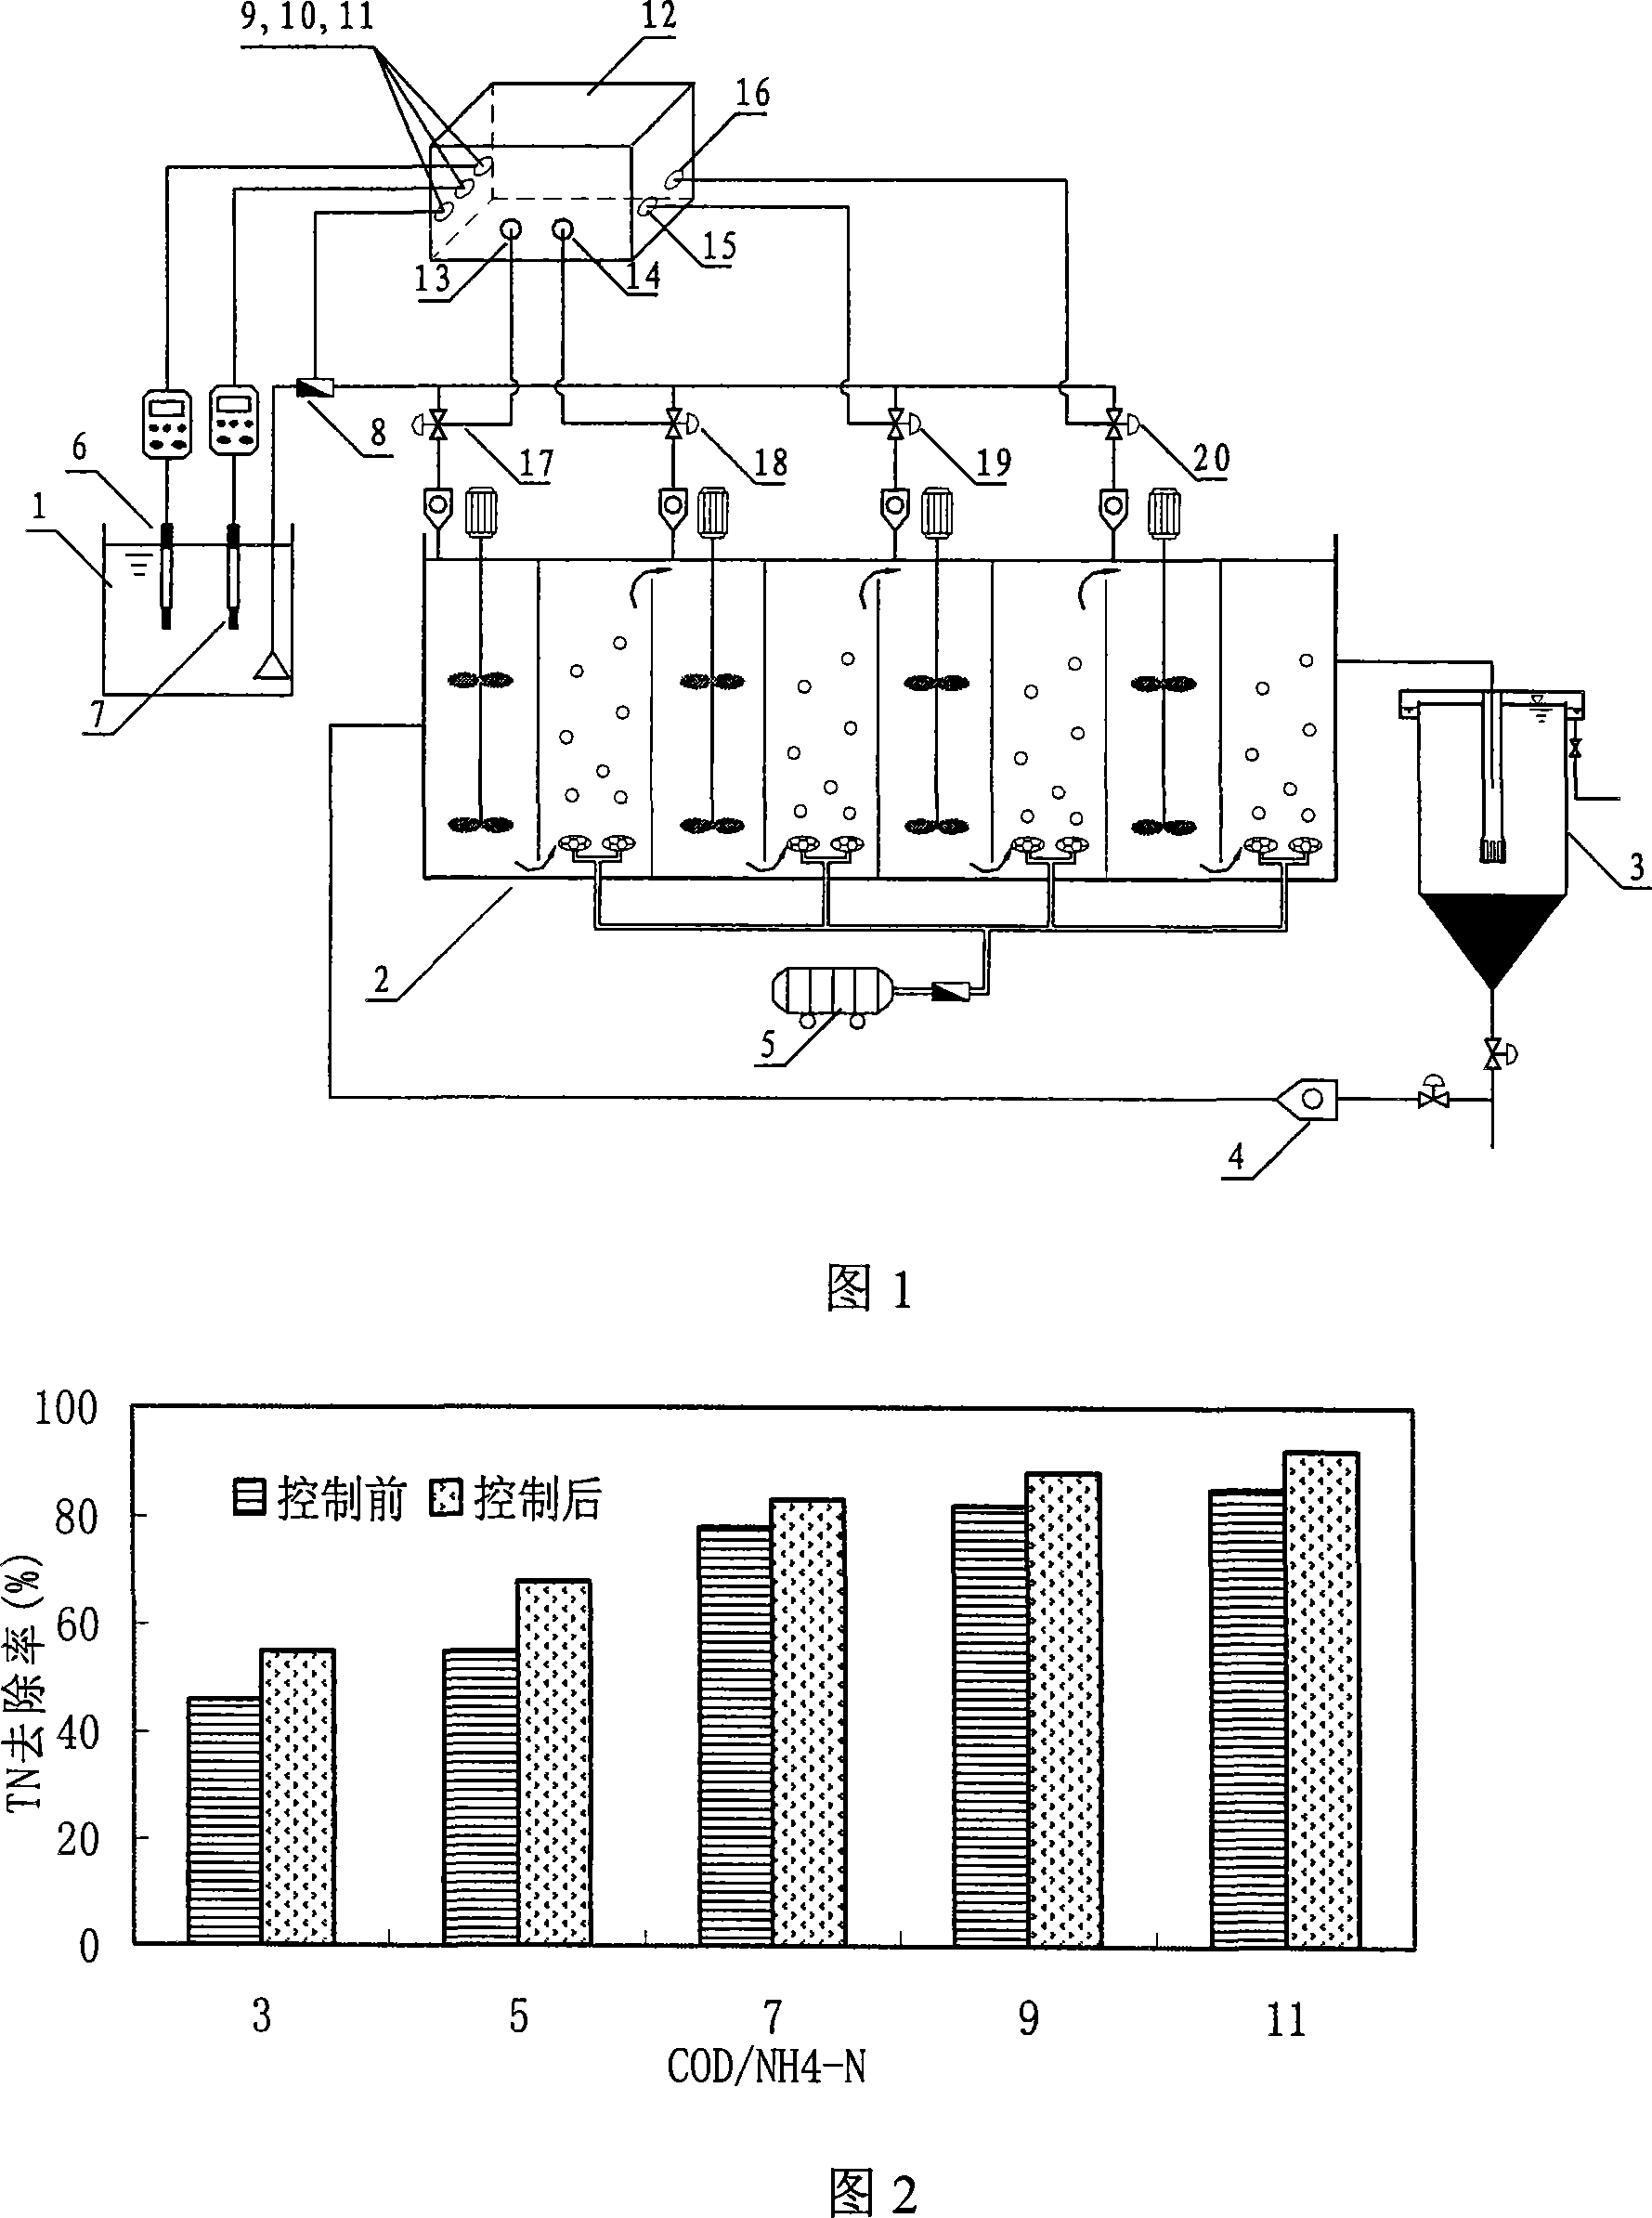 Control device and method for four-section water-feeding A/O technique water-feeding flow rate distribution process